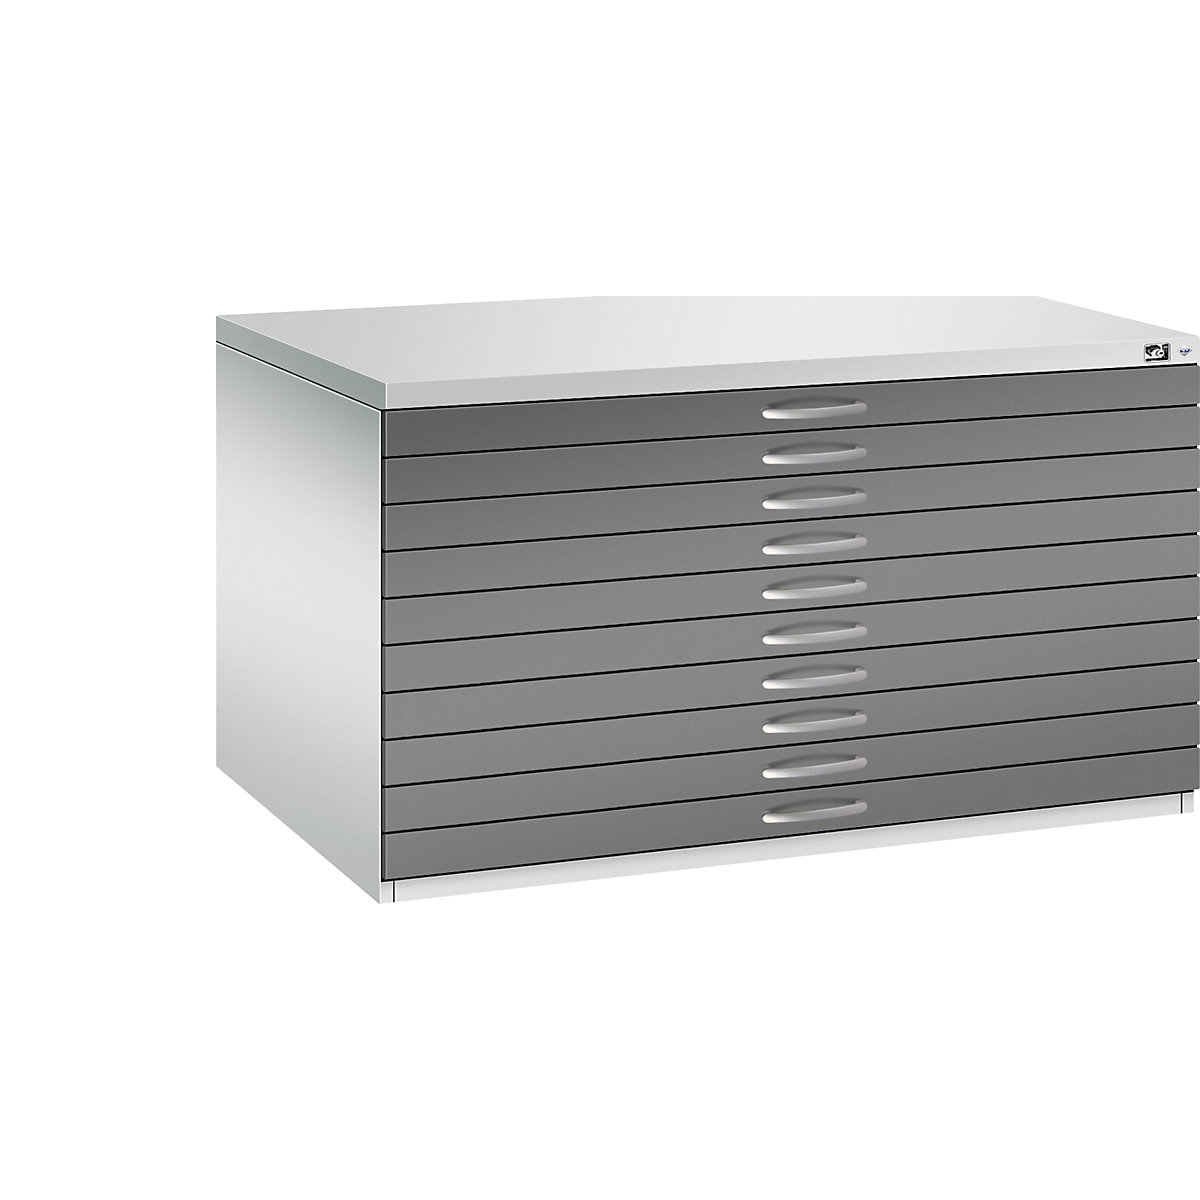 Drawing cabinet – C+P, A0, 10 drawers, height 760 mm, light grey / volcanic grey-15